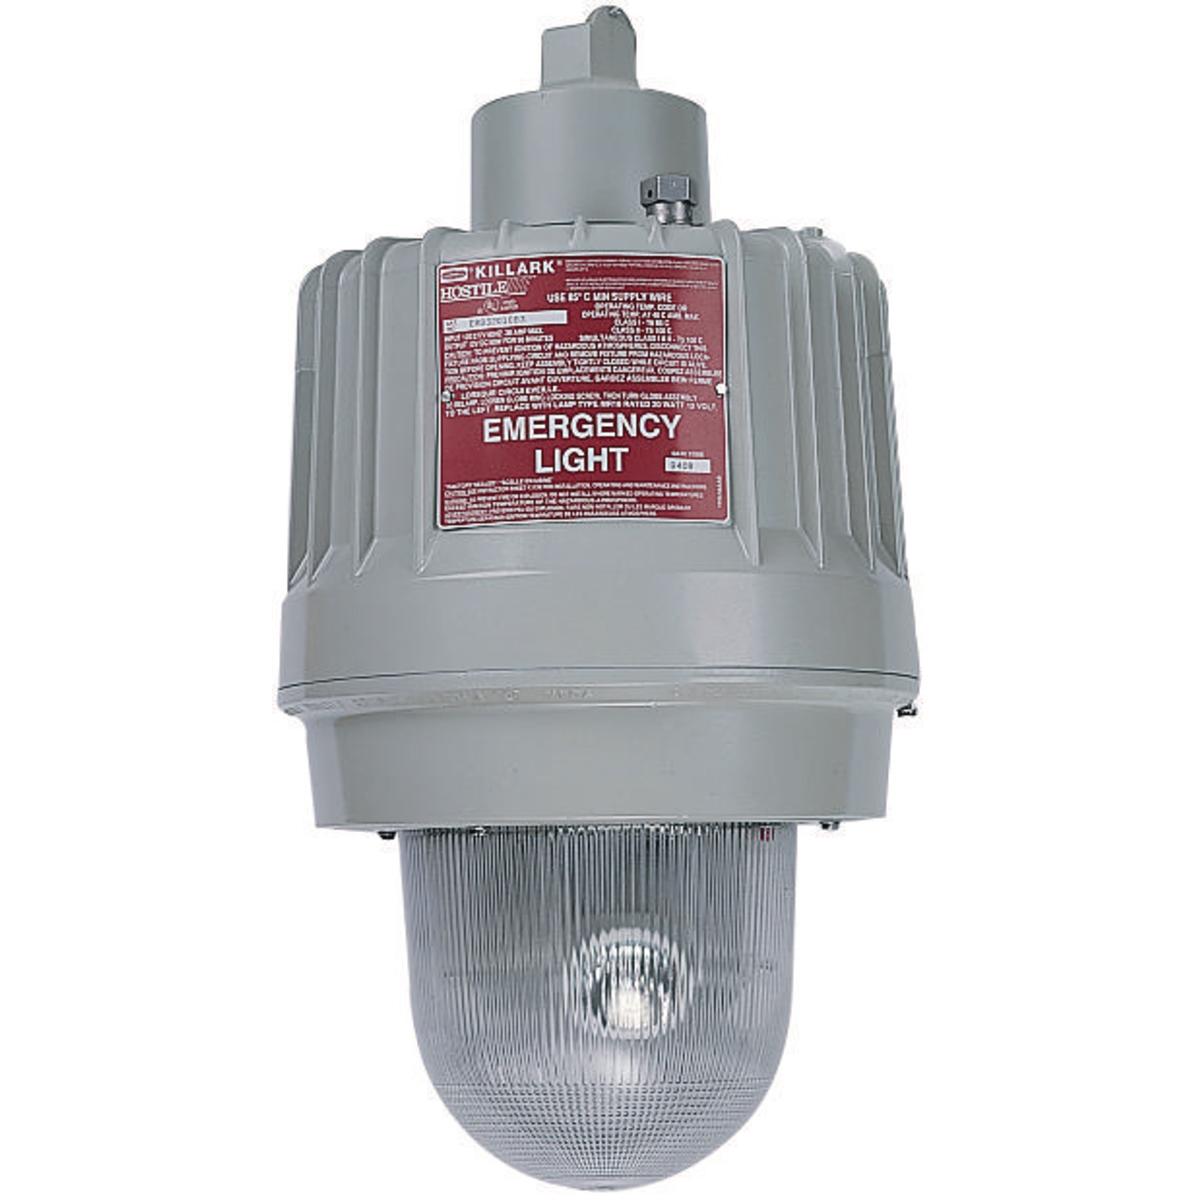 Hubbell EBB32010X3 Emergency Hazardous Location 1" Ceiling Mount  ; Patented design three high intensity lamps can be independently adjusted to provide custom emergency lighting to a specific area ; Three 20 watt MR16 lamps included ; Pendant, bracket and ceiling mounting s